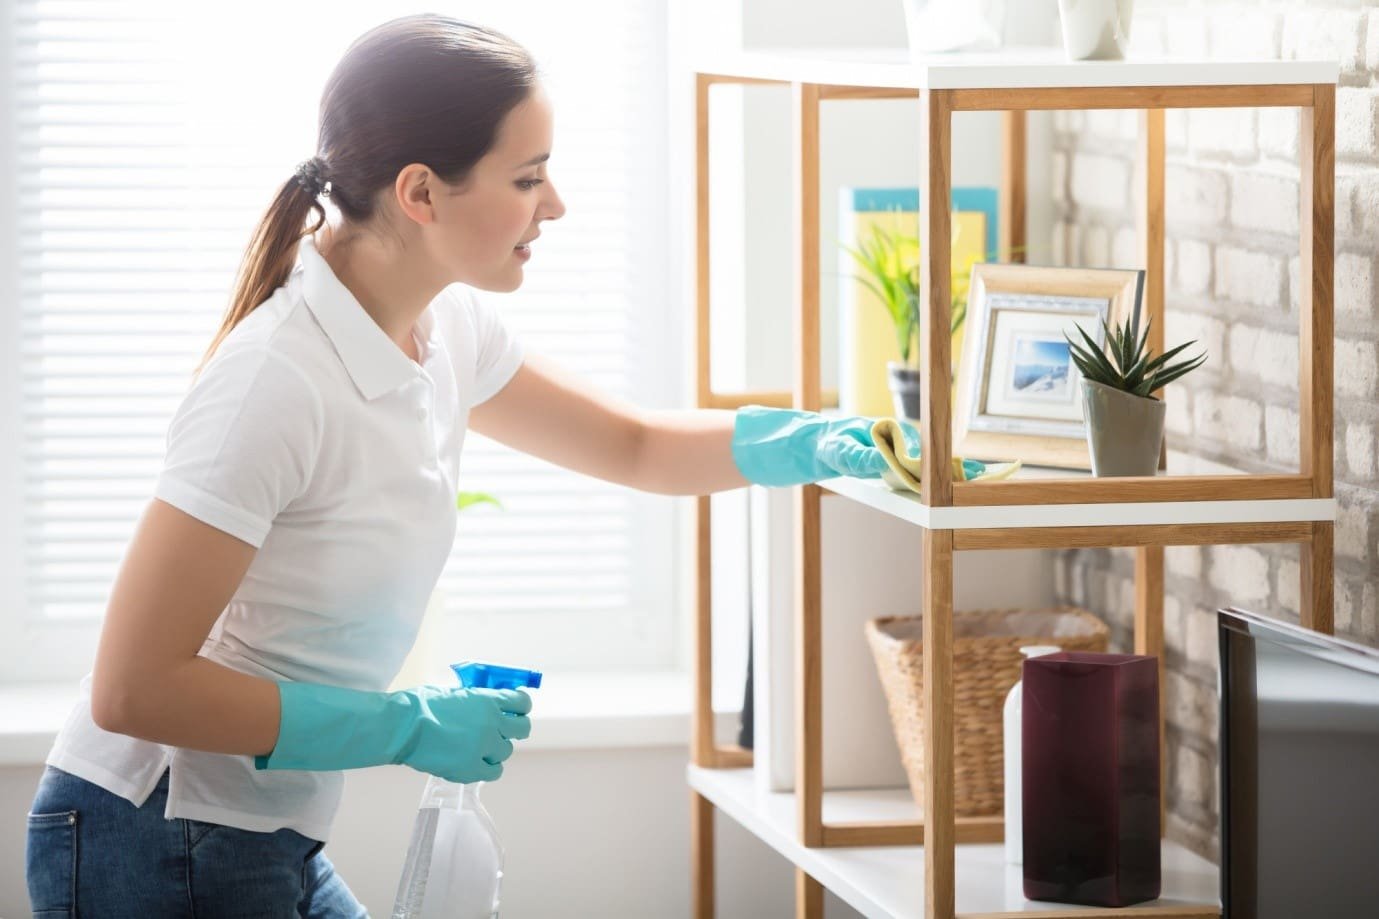 What Are The Health Benefits Of Clean Home Spaces